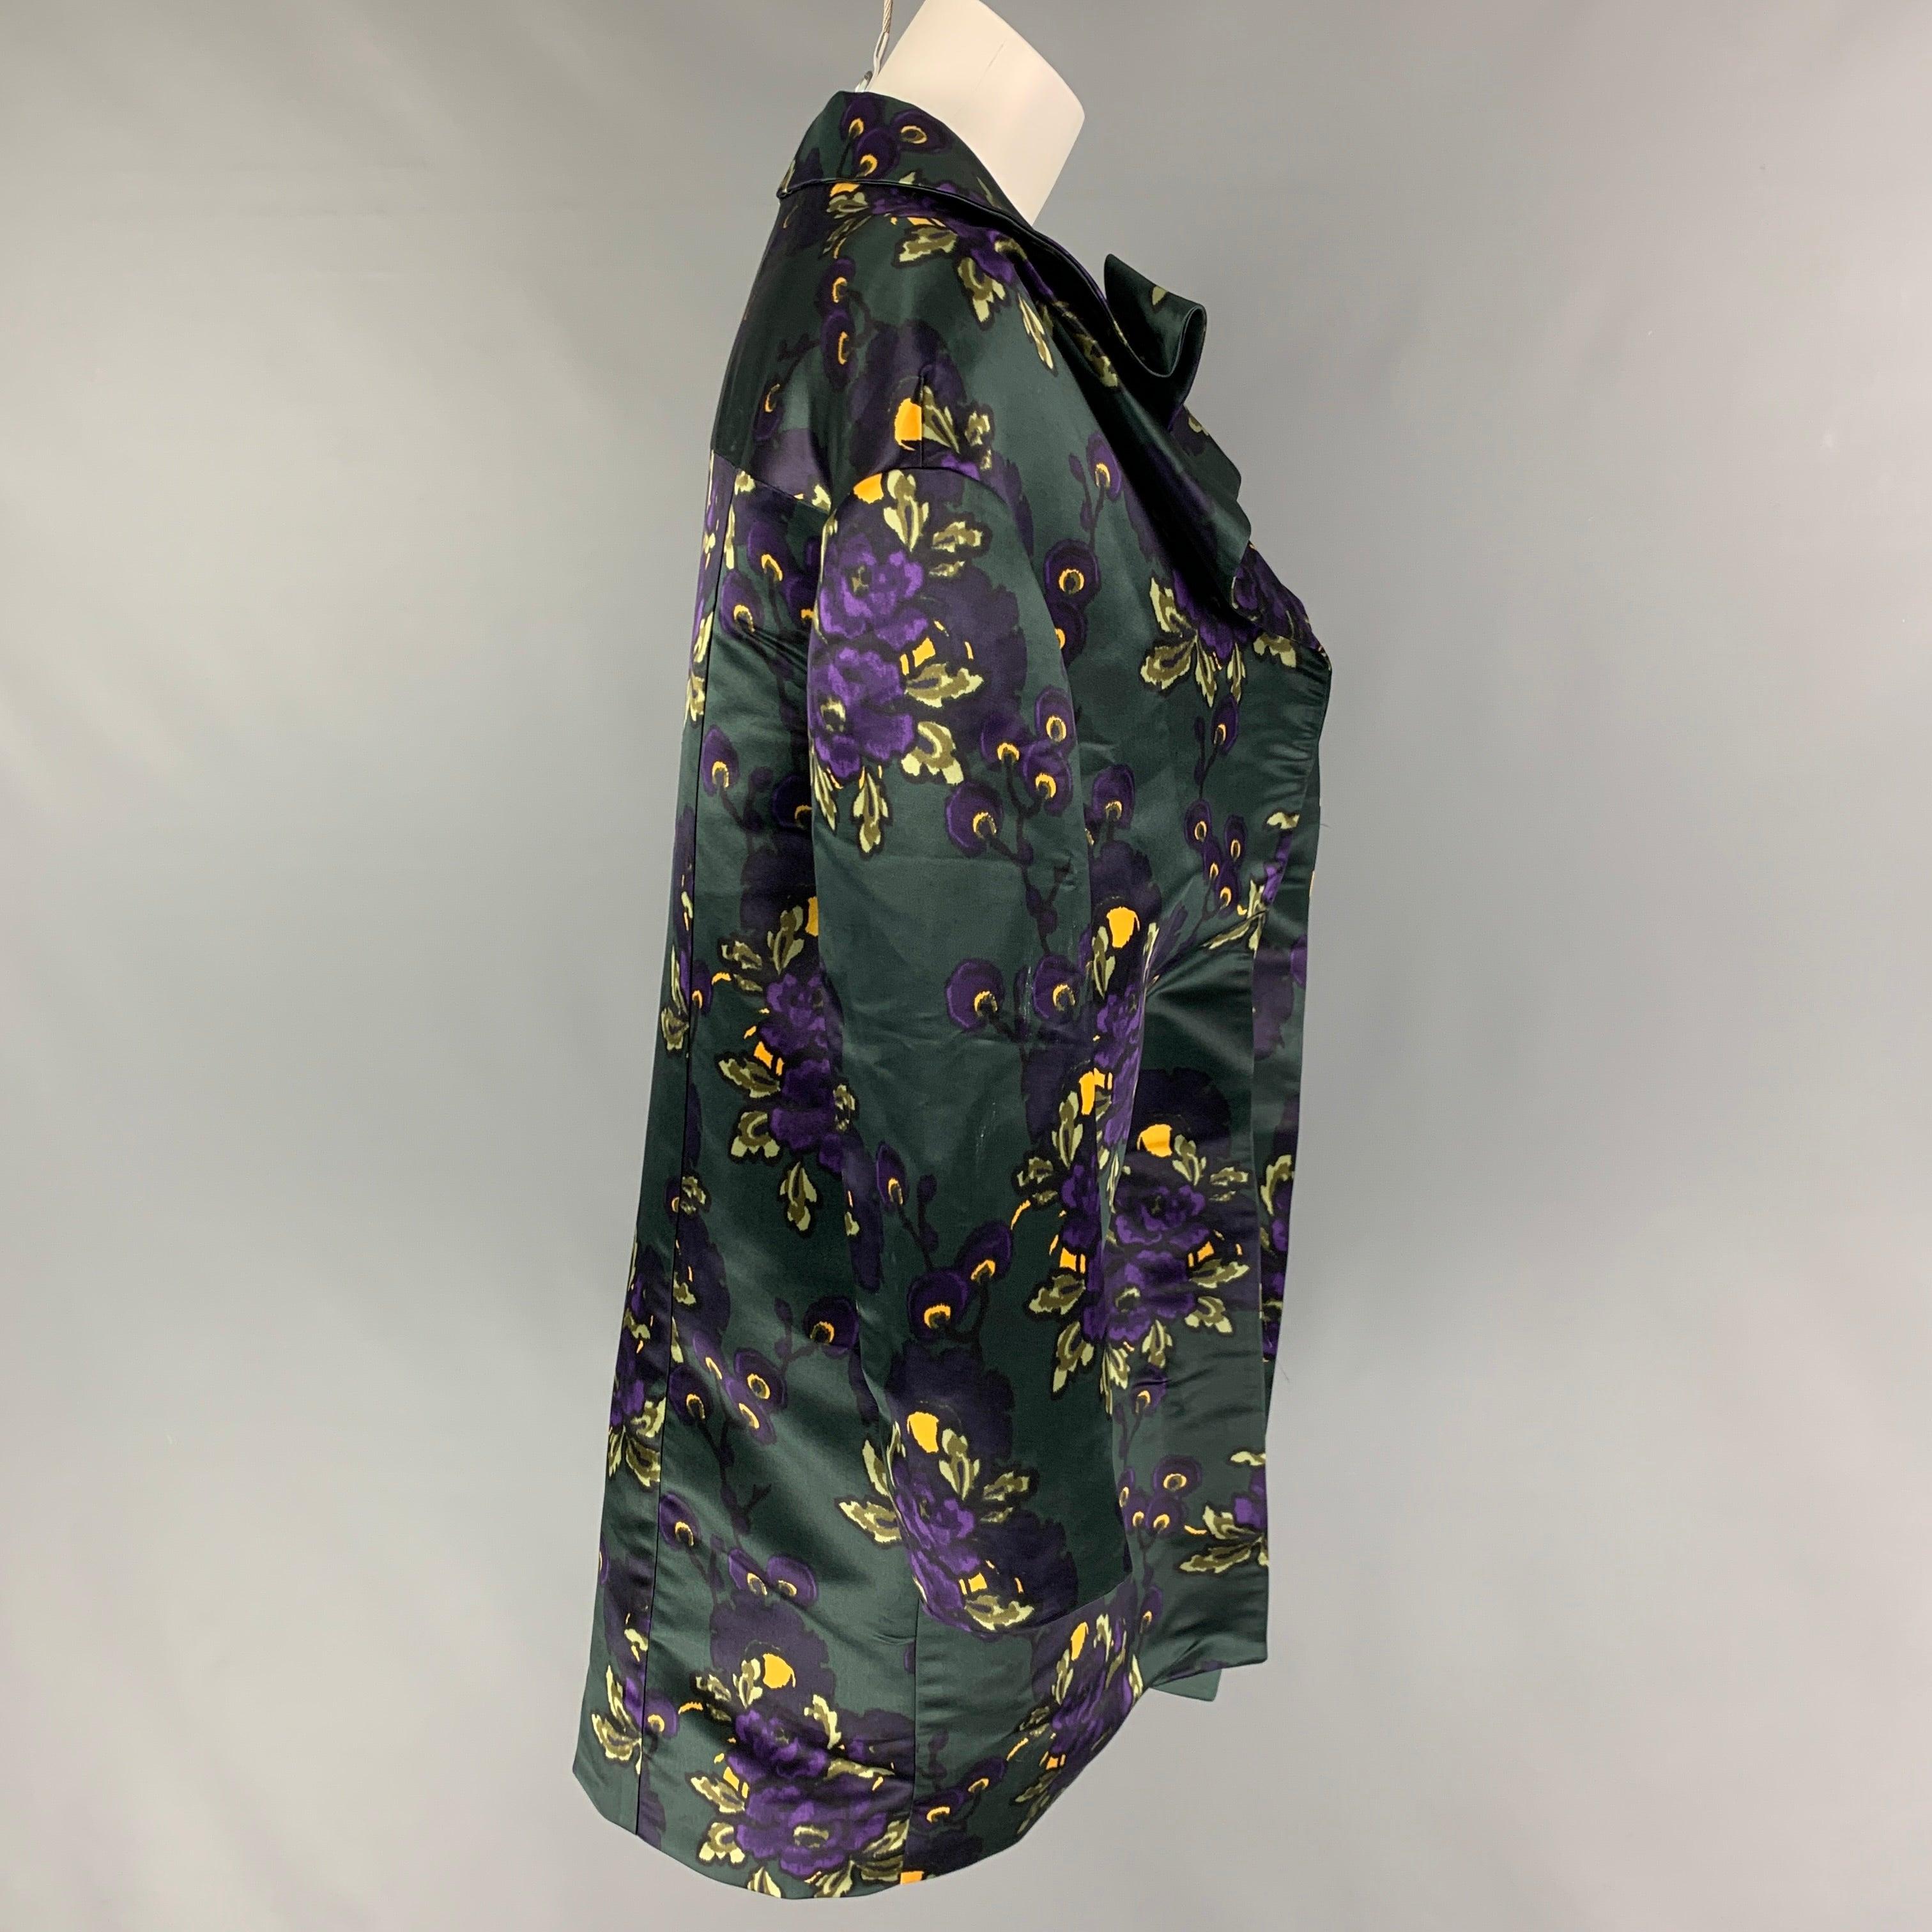 MARNI coat comes in a multi-color floral silk featuring a large structured collar, oversized fit, and a self -tie closure. Made in Italy.
Excellent
Pre-Owned Condition. 

Marked:   38 

Measurements: 
 
Shoulder: 20 inches  Bust: 39 inches  Sleeve: